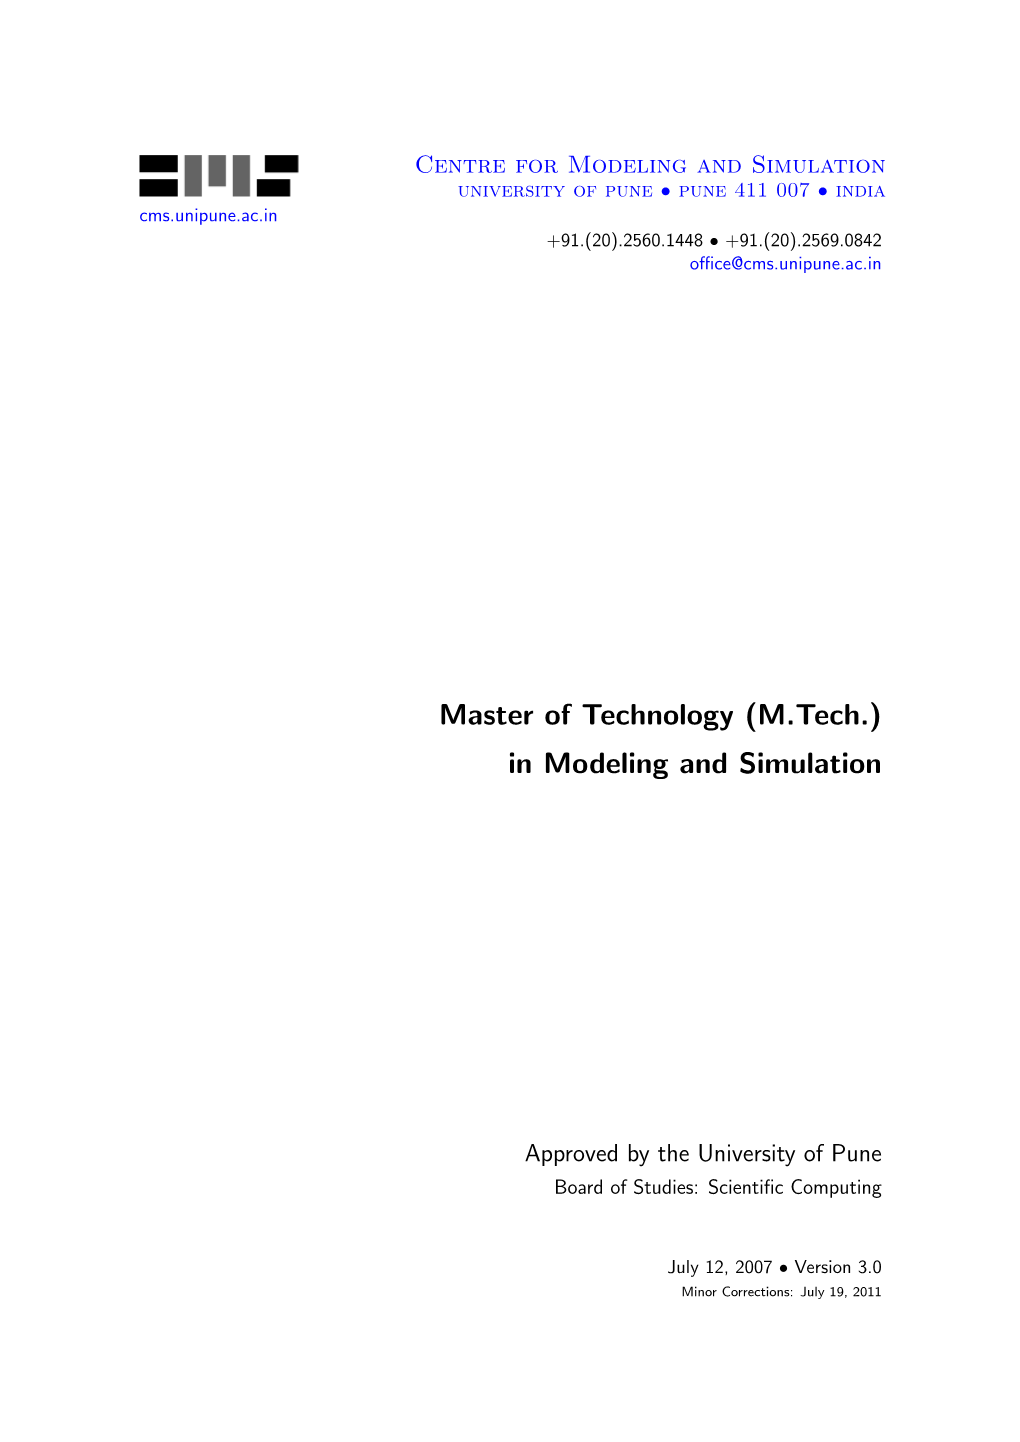 Master of Technology (M.Tech.) in Modeling and Simulation